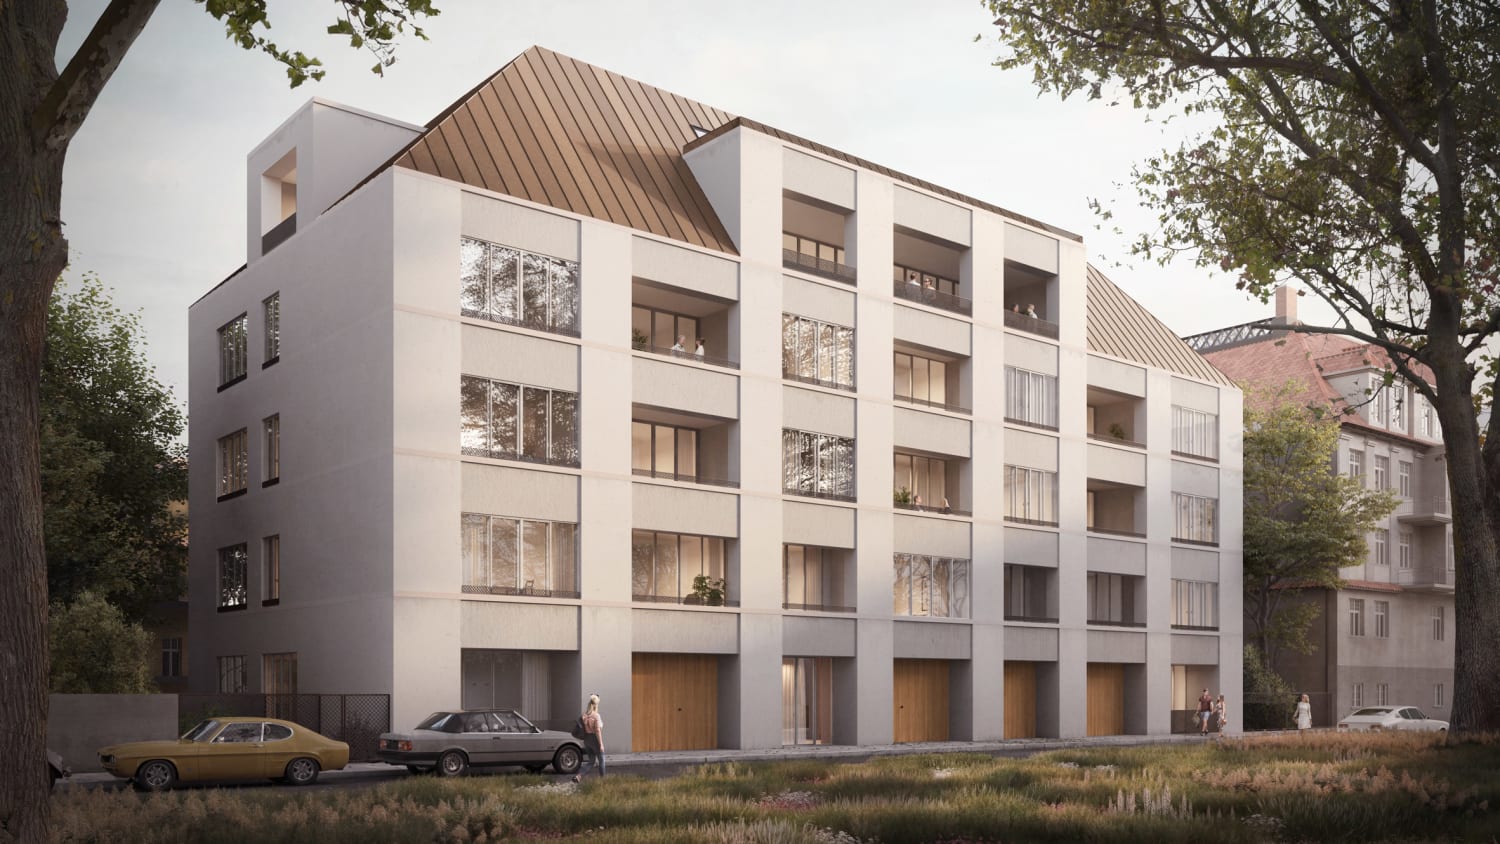 Euroboden apartments by David Chipperfield will be clad in limestone